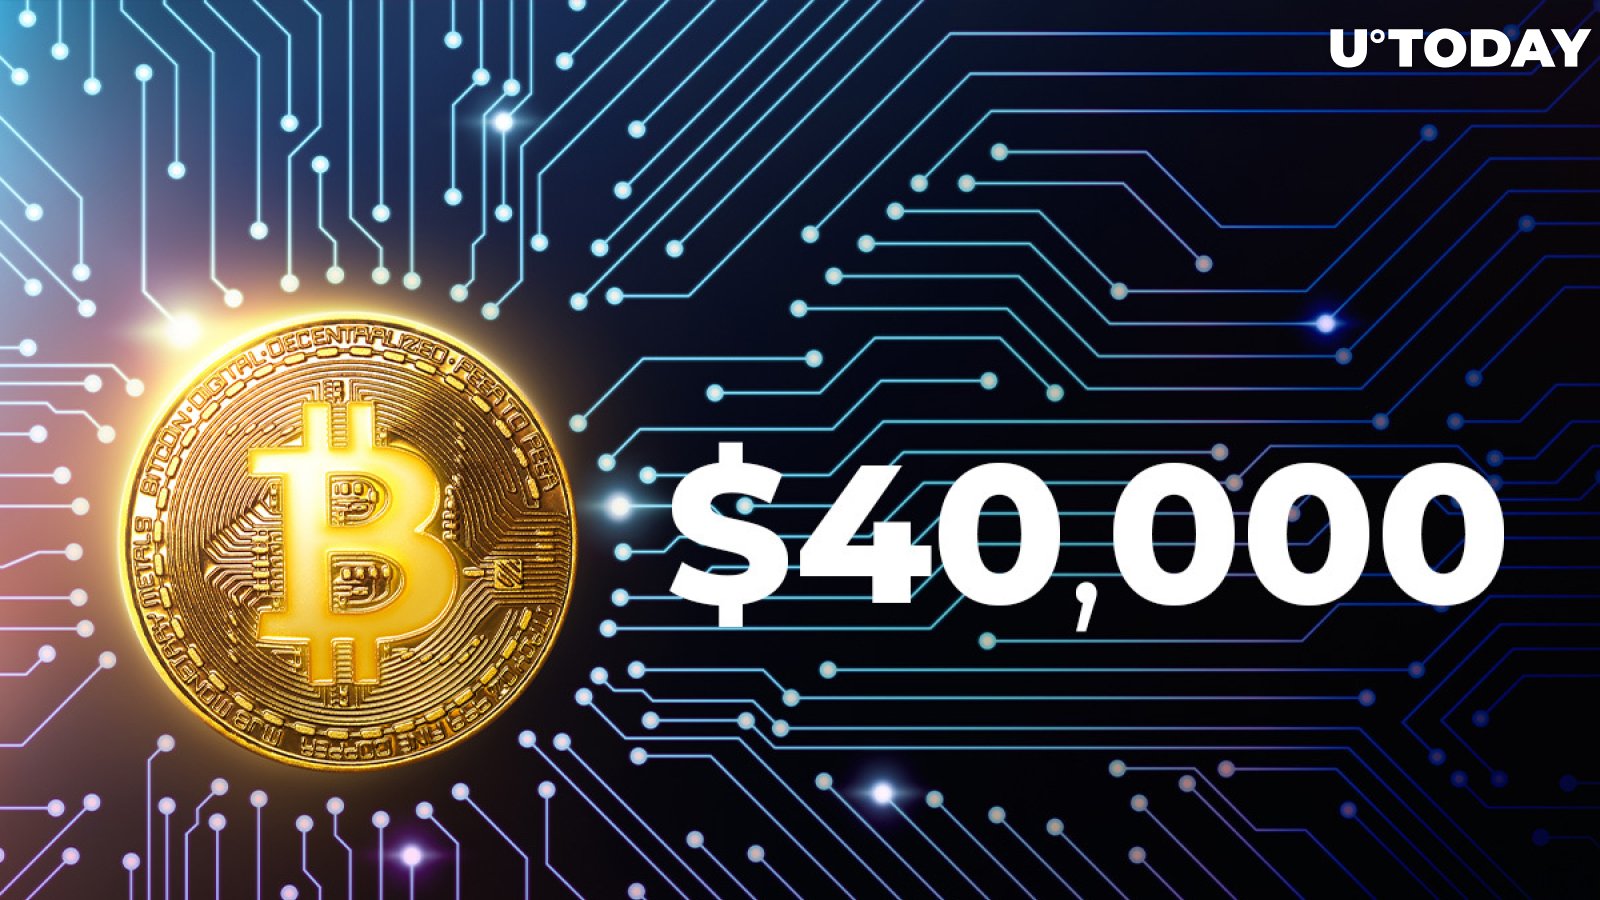 Bitcoin Reaching $40,000 More Likely Than $20,000, Bloomberg’s Mike McGlone Explains Why